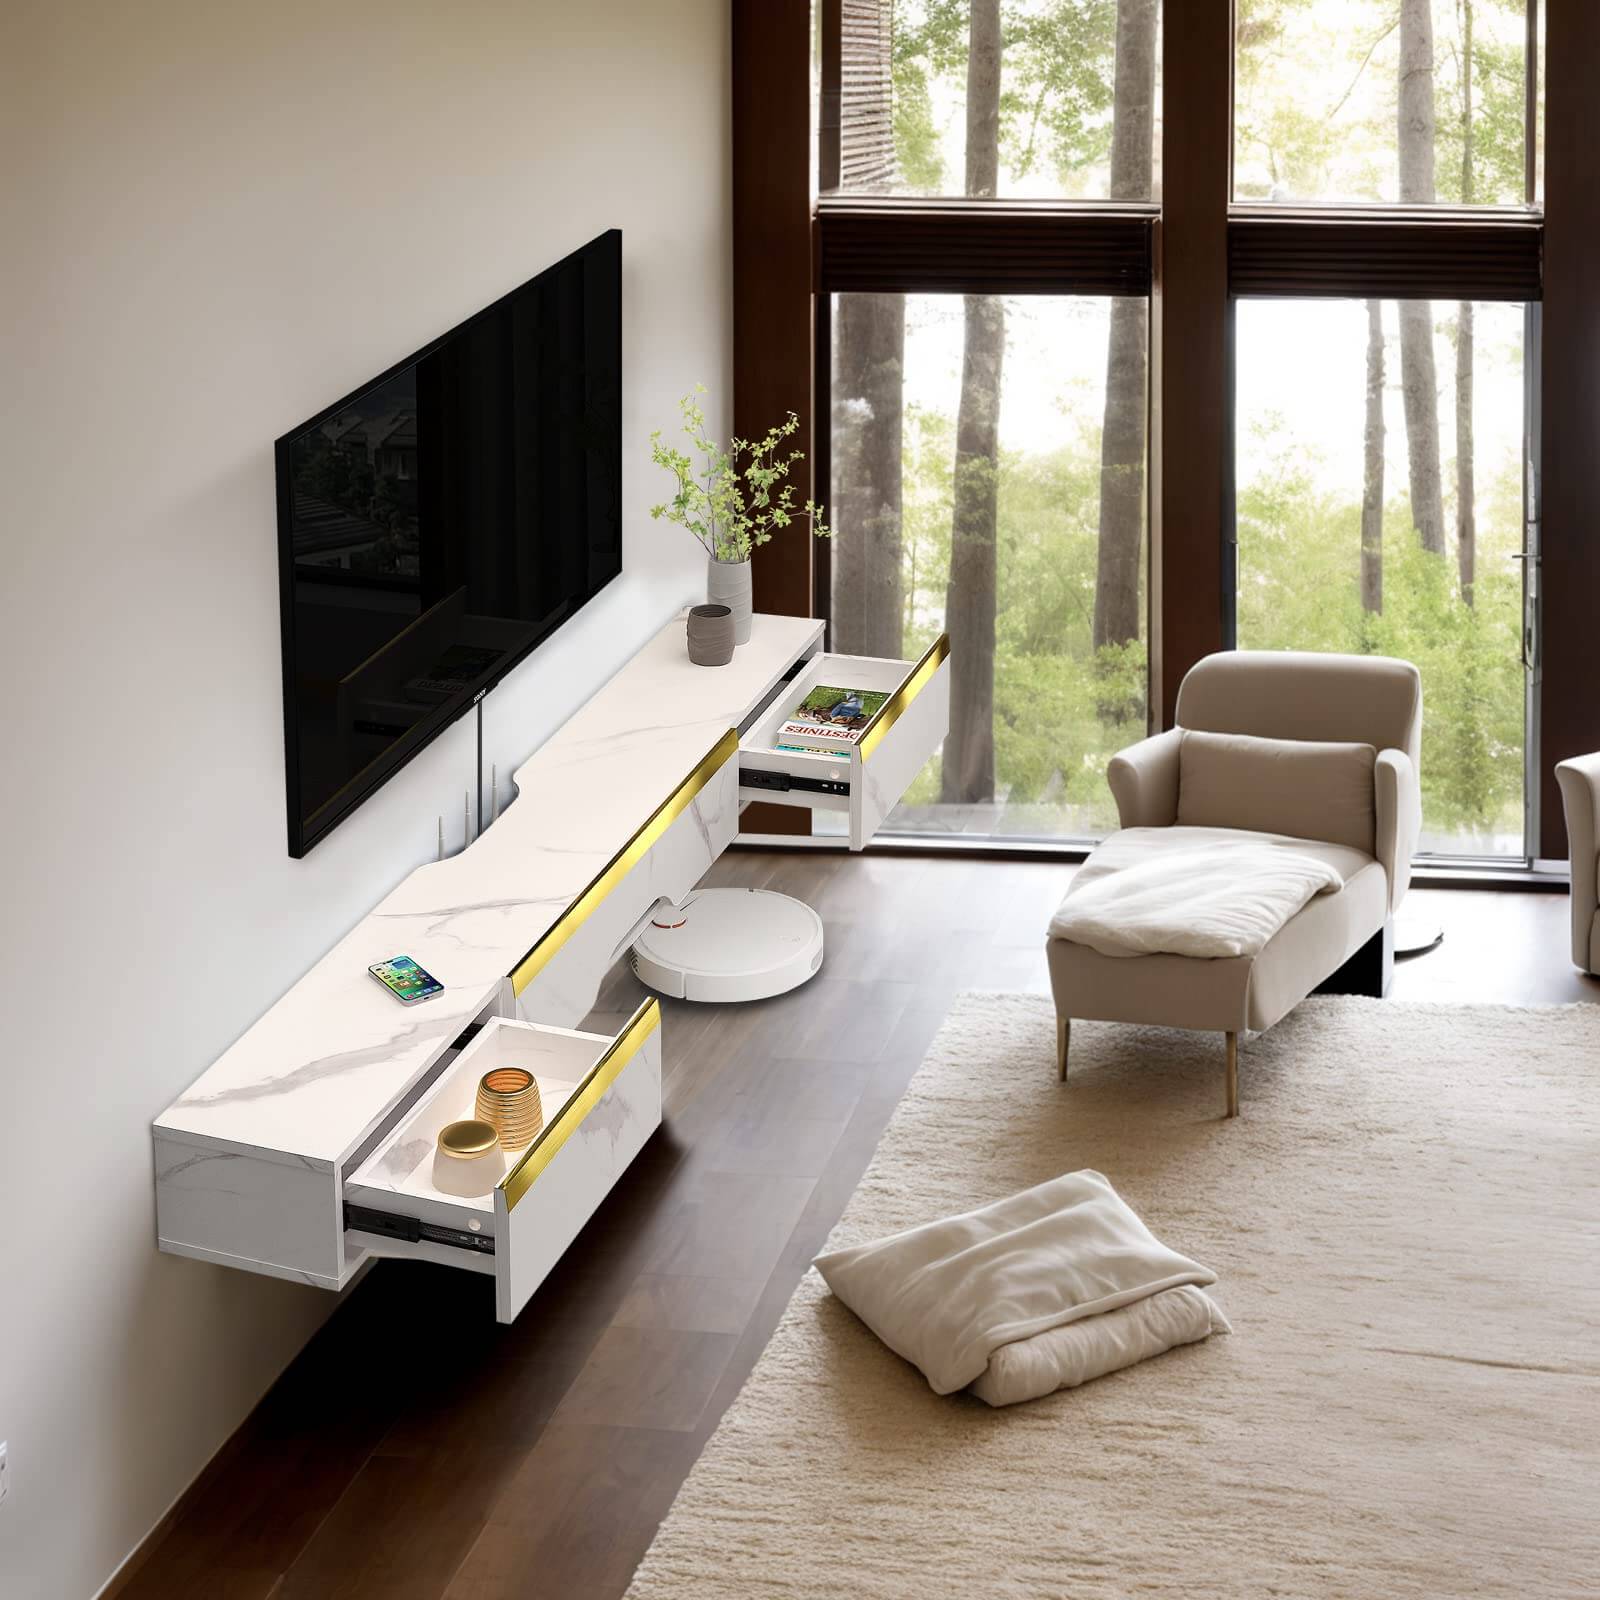 Dark Grey Plywood Modern Wall Mounted Floating TV Console with Door and Drawer #color_pietra white